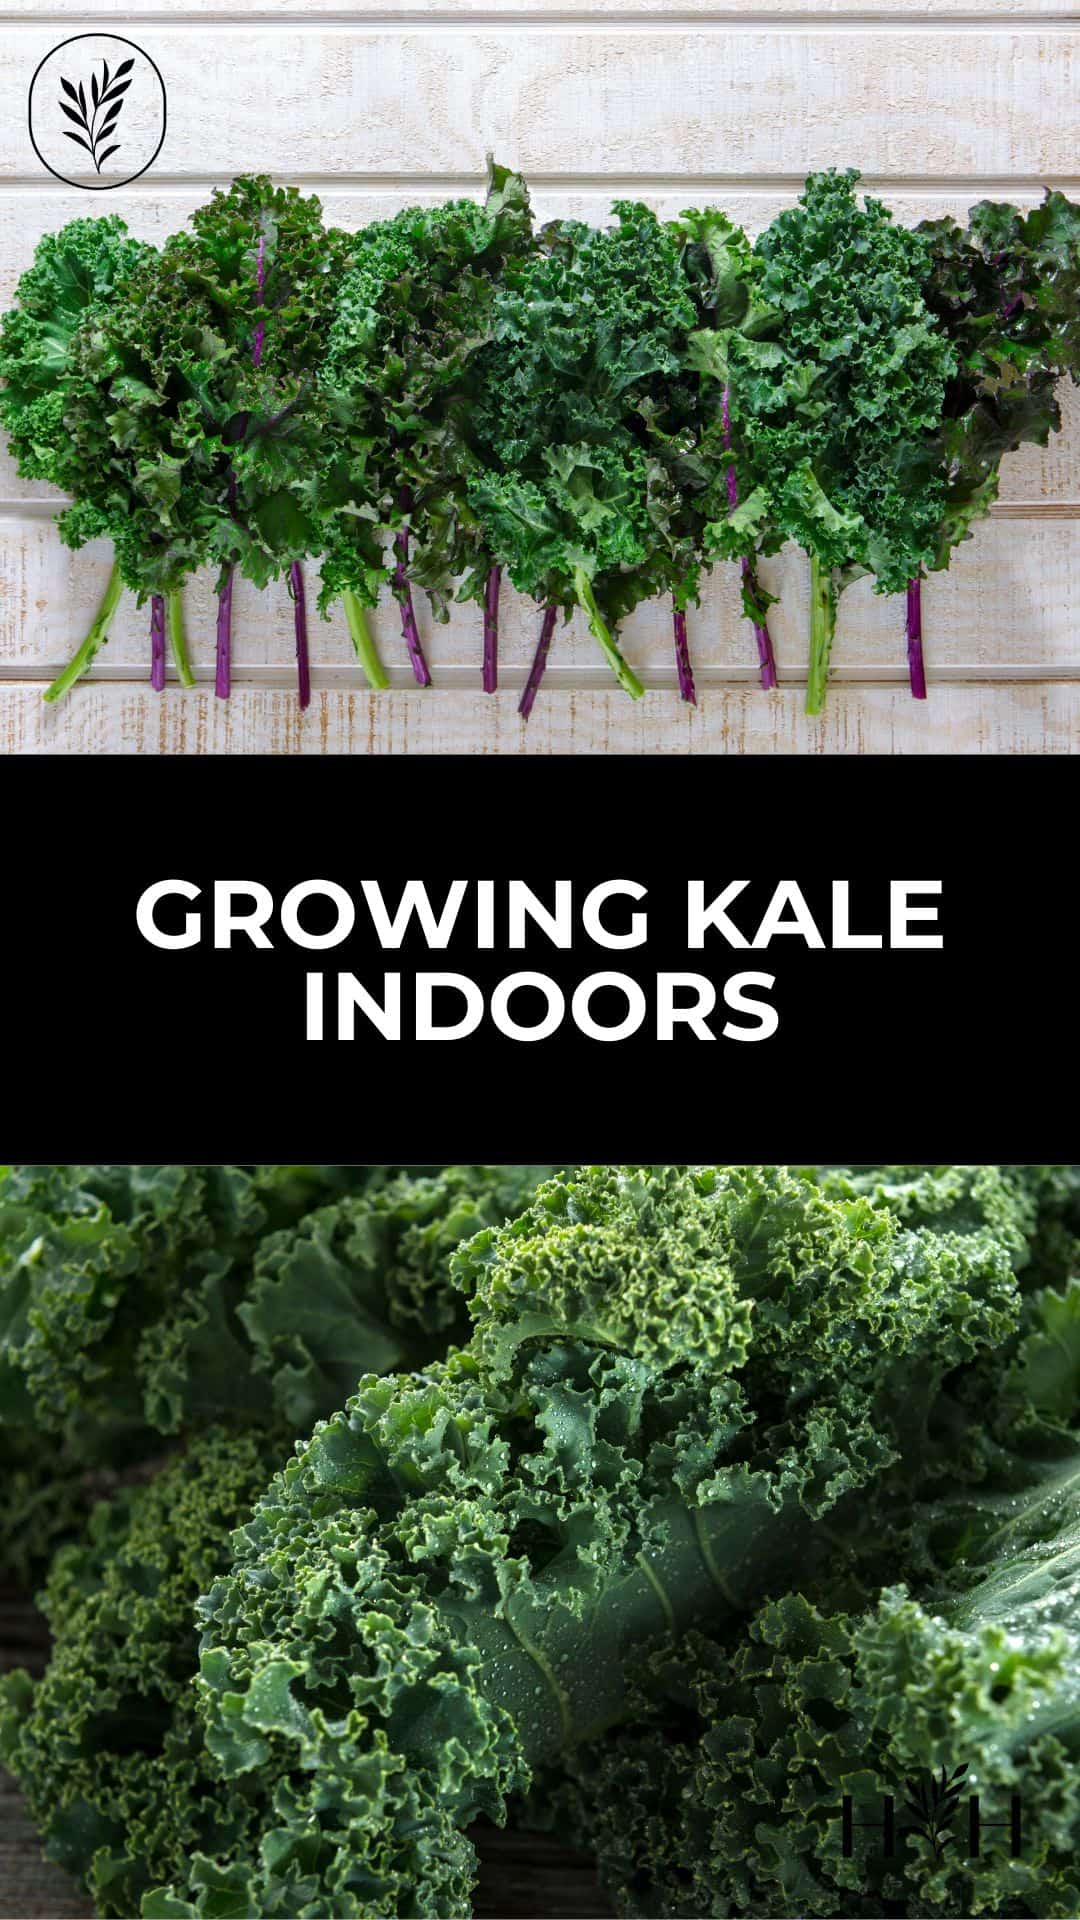 Growing kale indoors is totally possible and can be totally easy. You just have to make sure the baby kale plants get what they need. Luckily kale is one of the easiest vegetables to grow at home! Via @home4theharvest